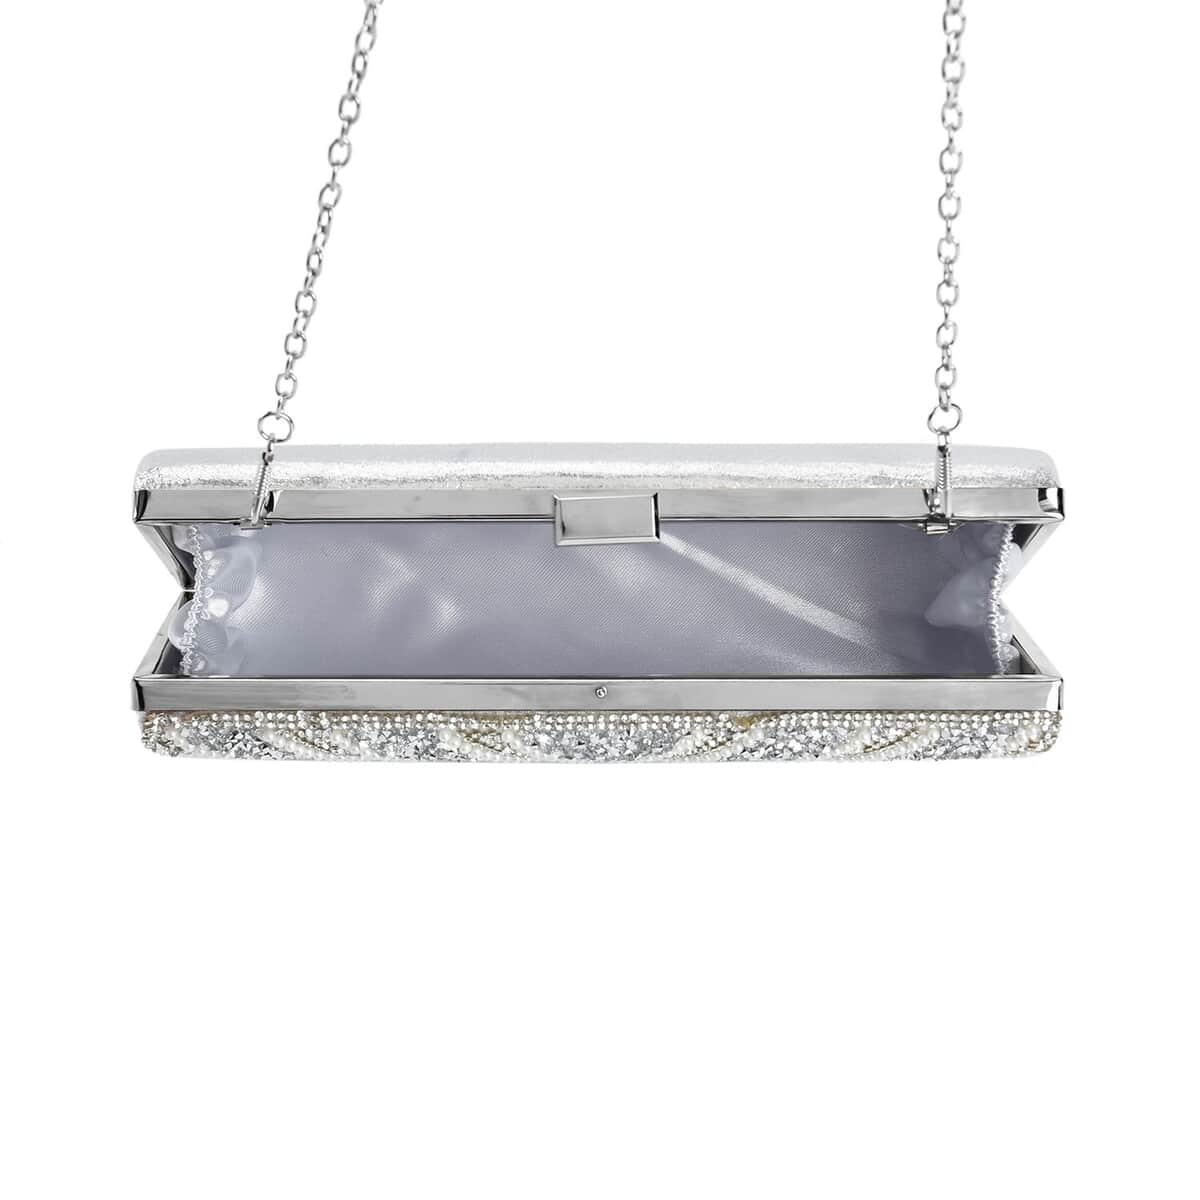 Silver Sparkling Clutch Bag with Chain Strap image number 4